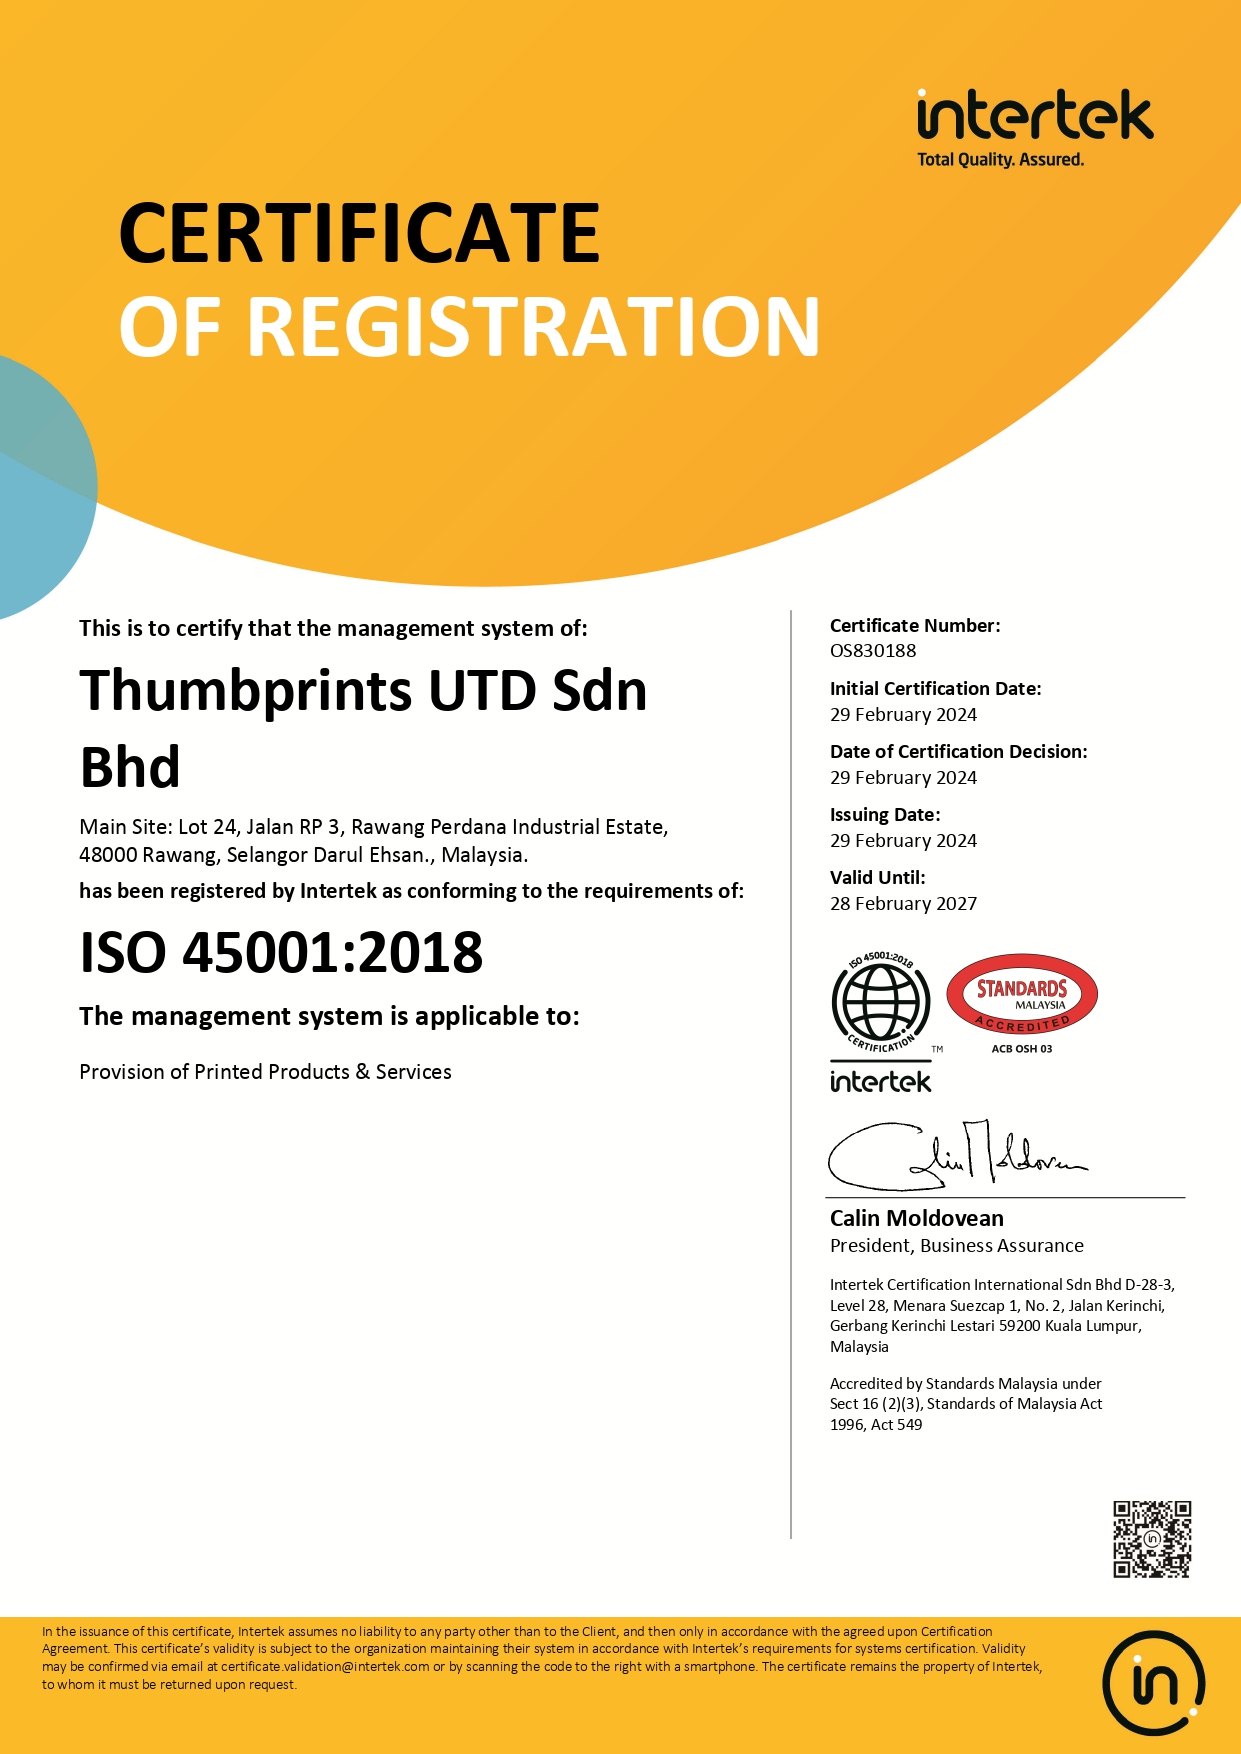 ISO 45001:2018 (29.02.2024-28.02.2027)